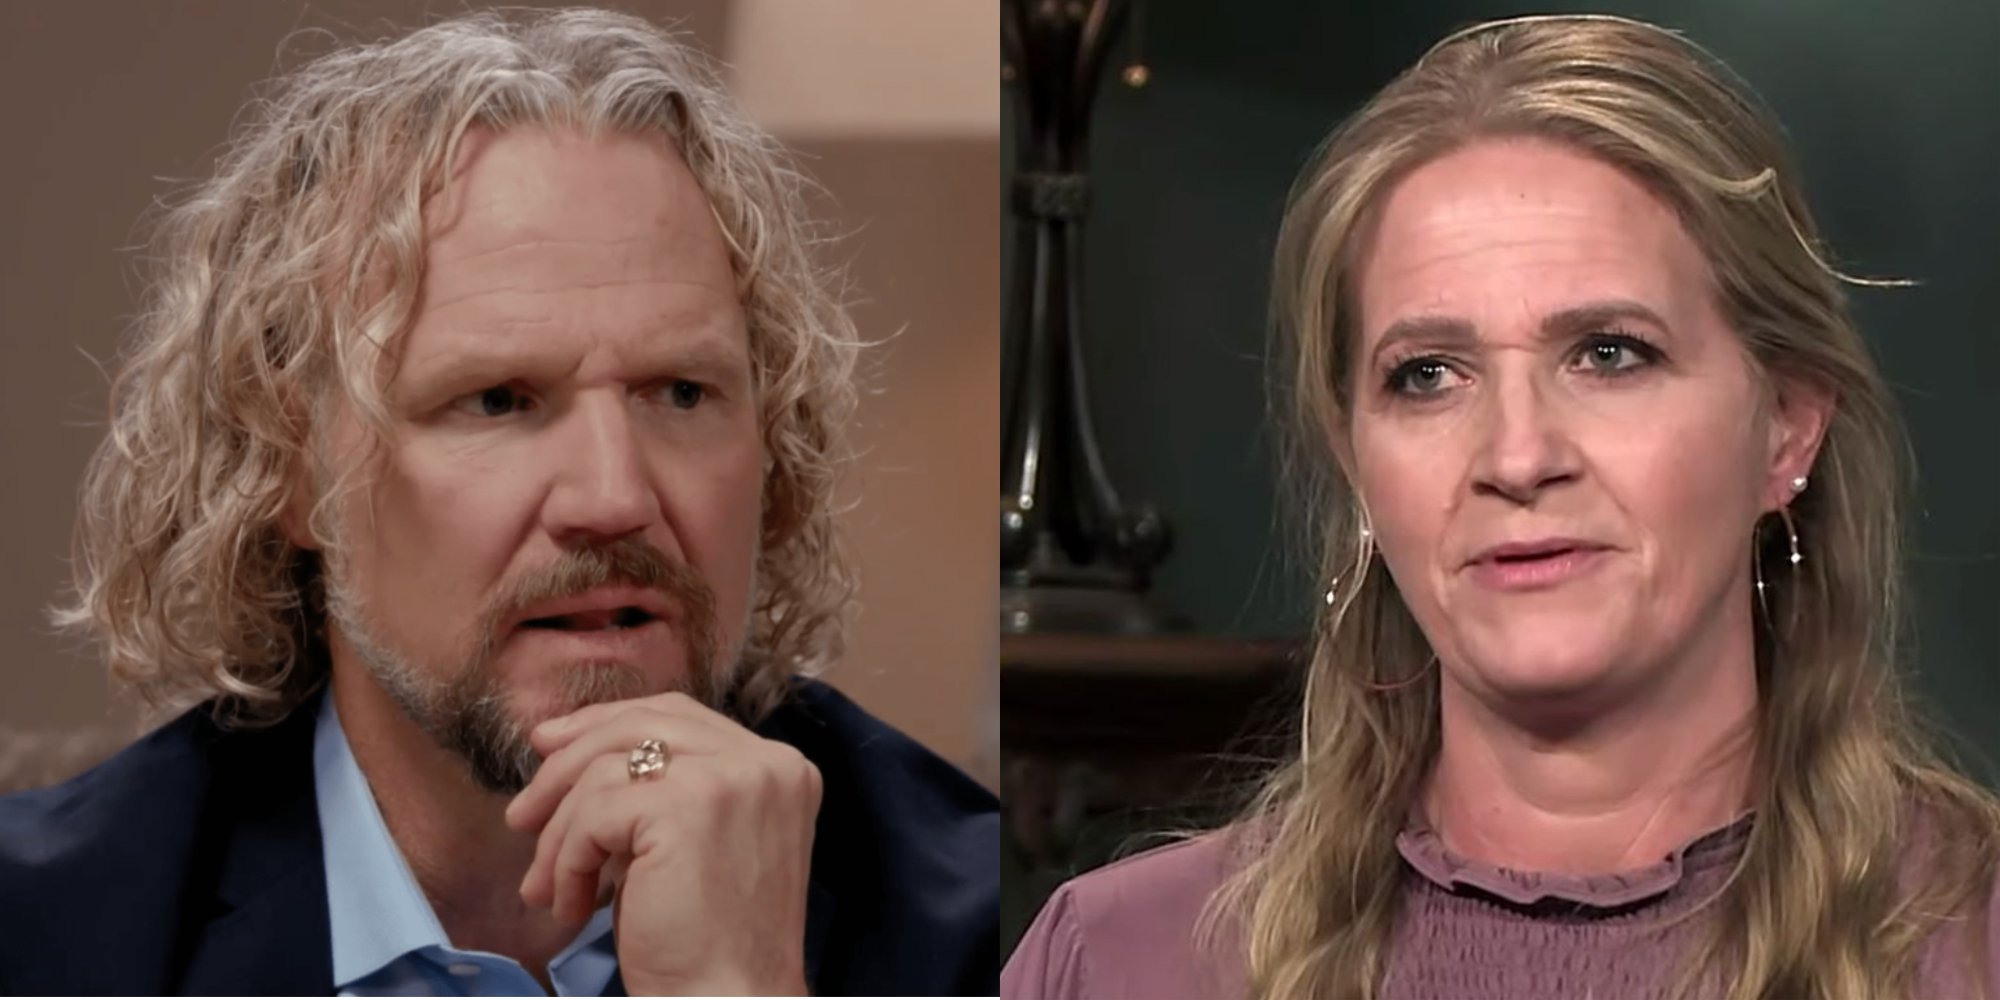 Kody Brown and Christine Brown in side by side photographs taken during 'Sister Wives' confessionals.